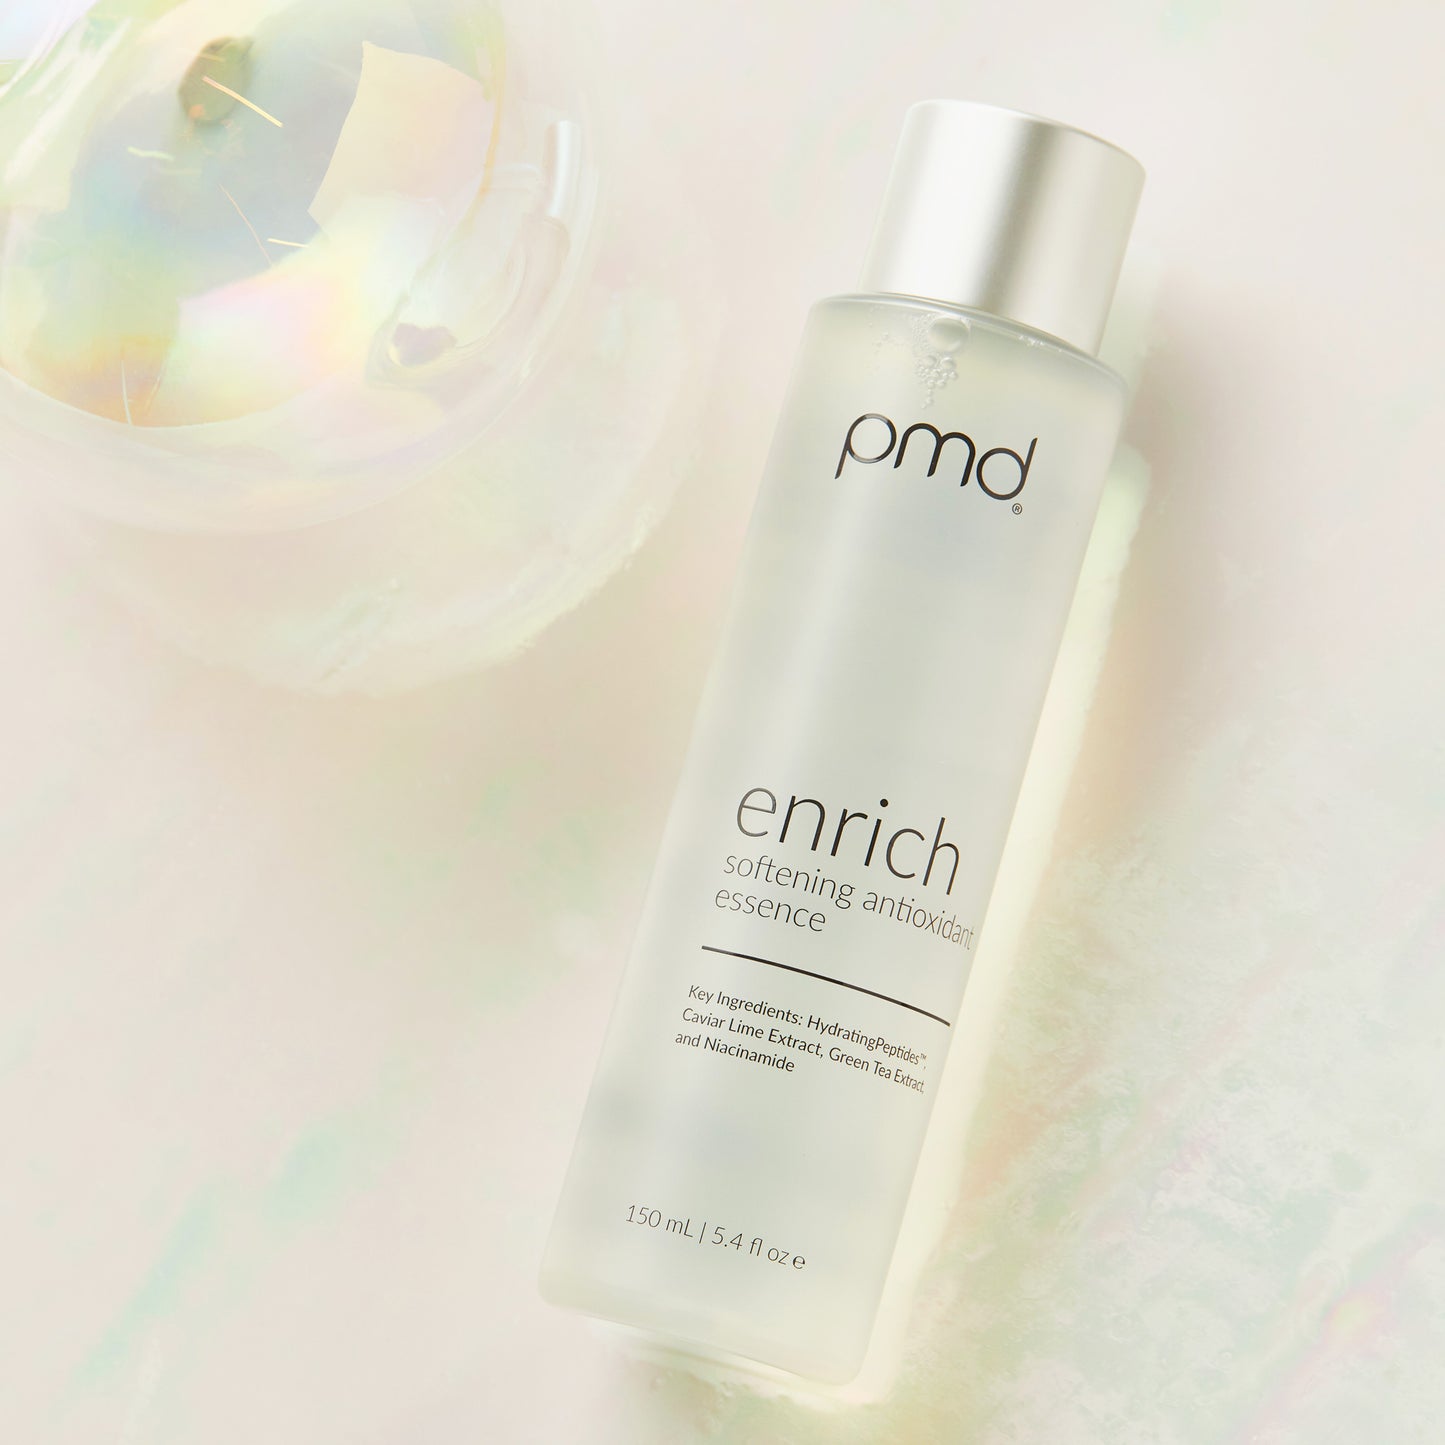 Enrich Softening Antioxidant Essence laying down next to clear globe